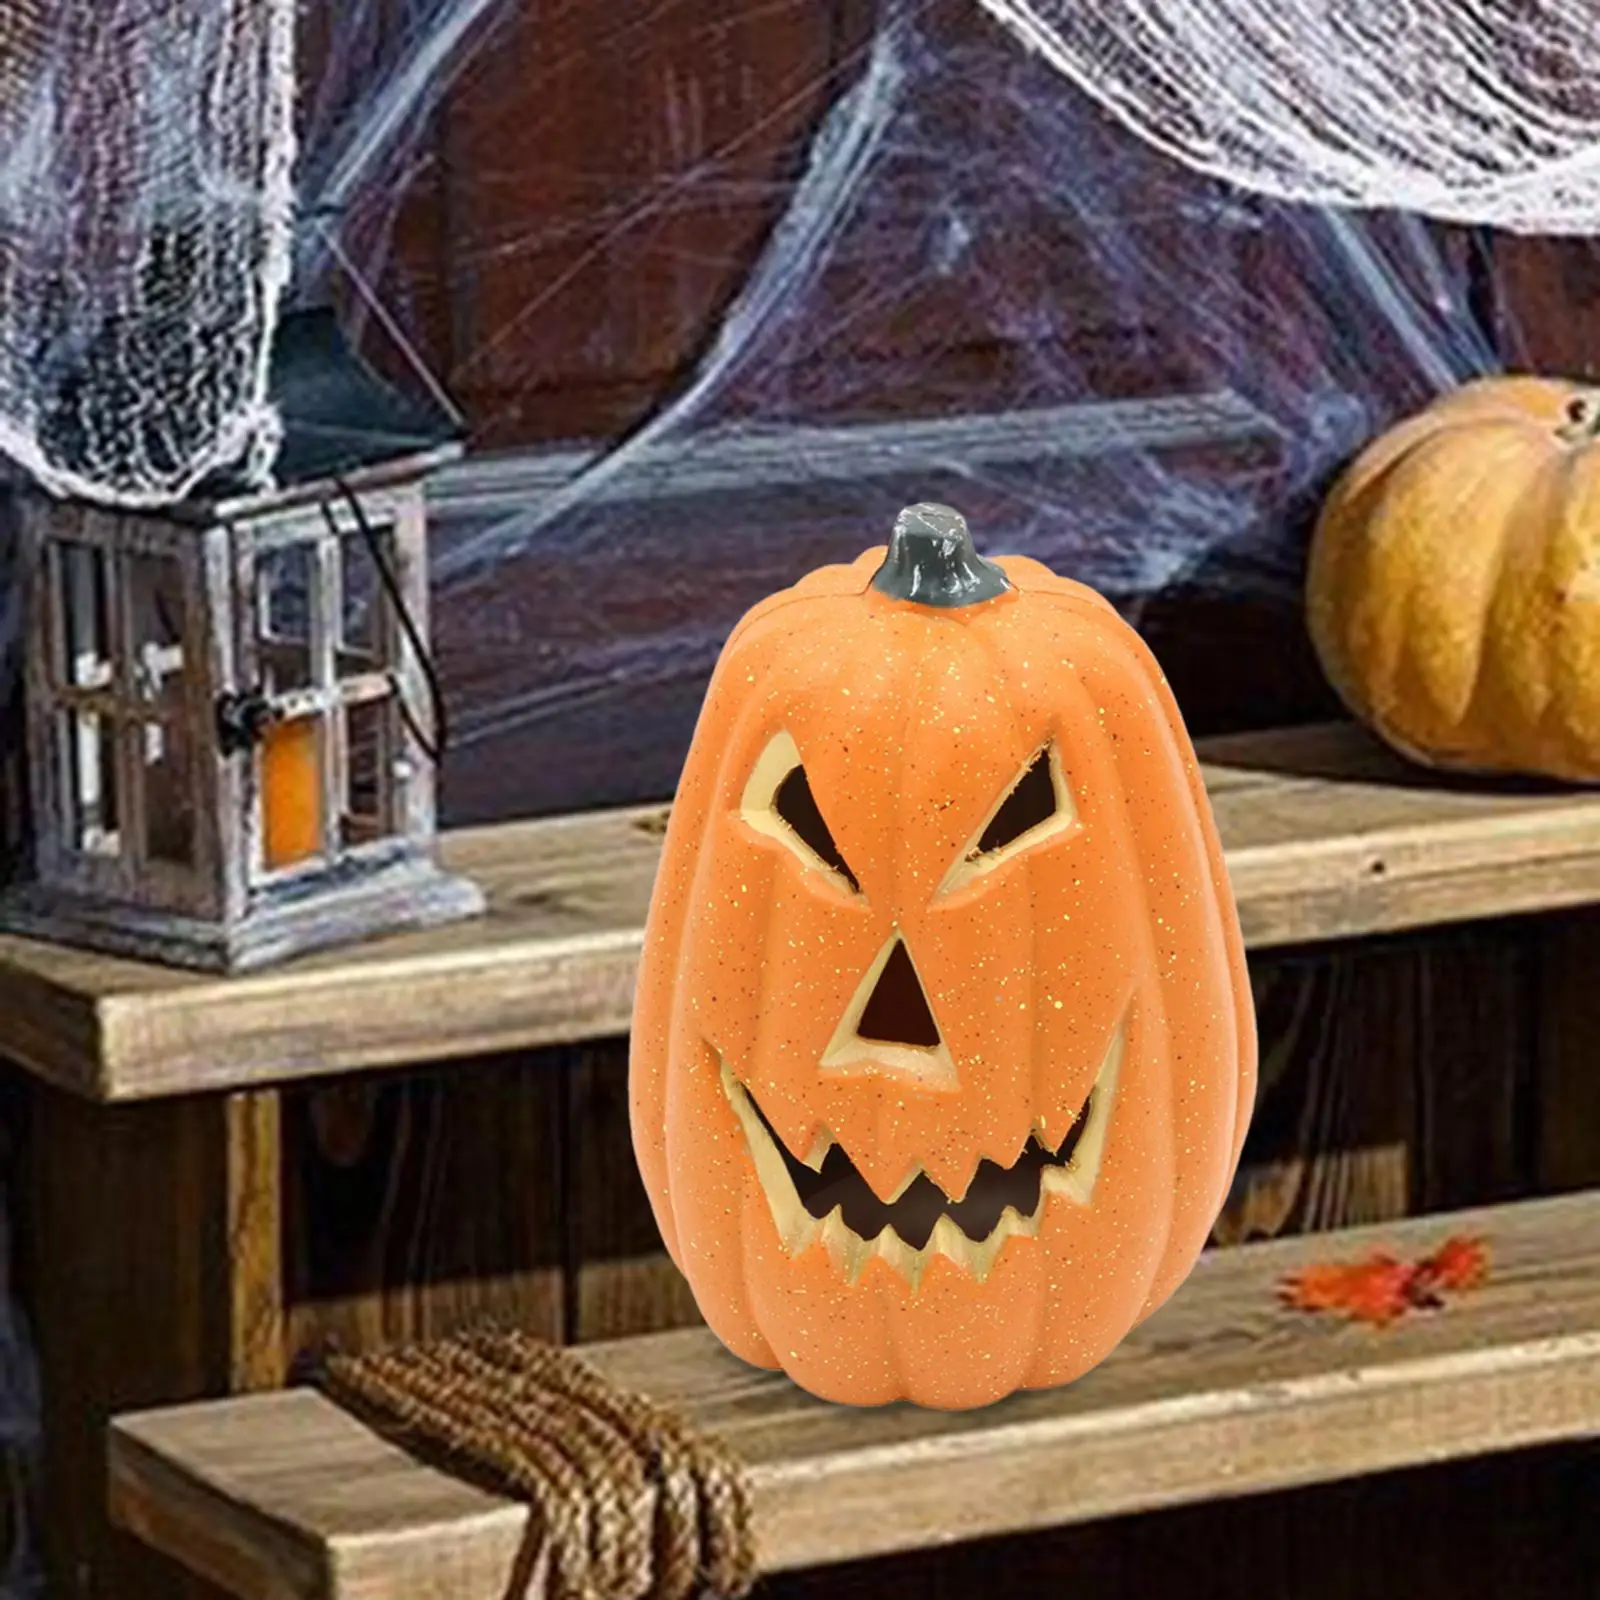 Halloween Artificial Pumpkins for Holiday Festival Decoration Table Centerpiece